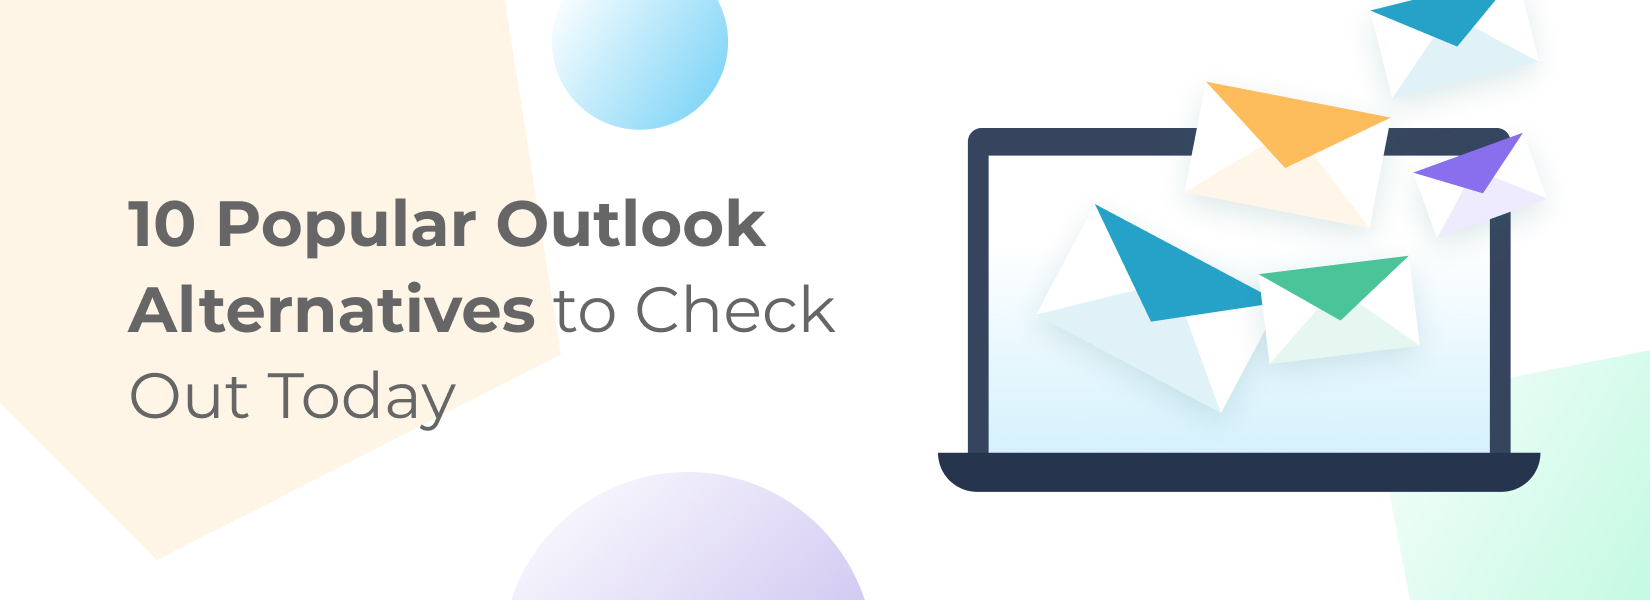 10 Popular Outlook Alternatives to Check Out Today